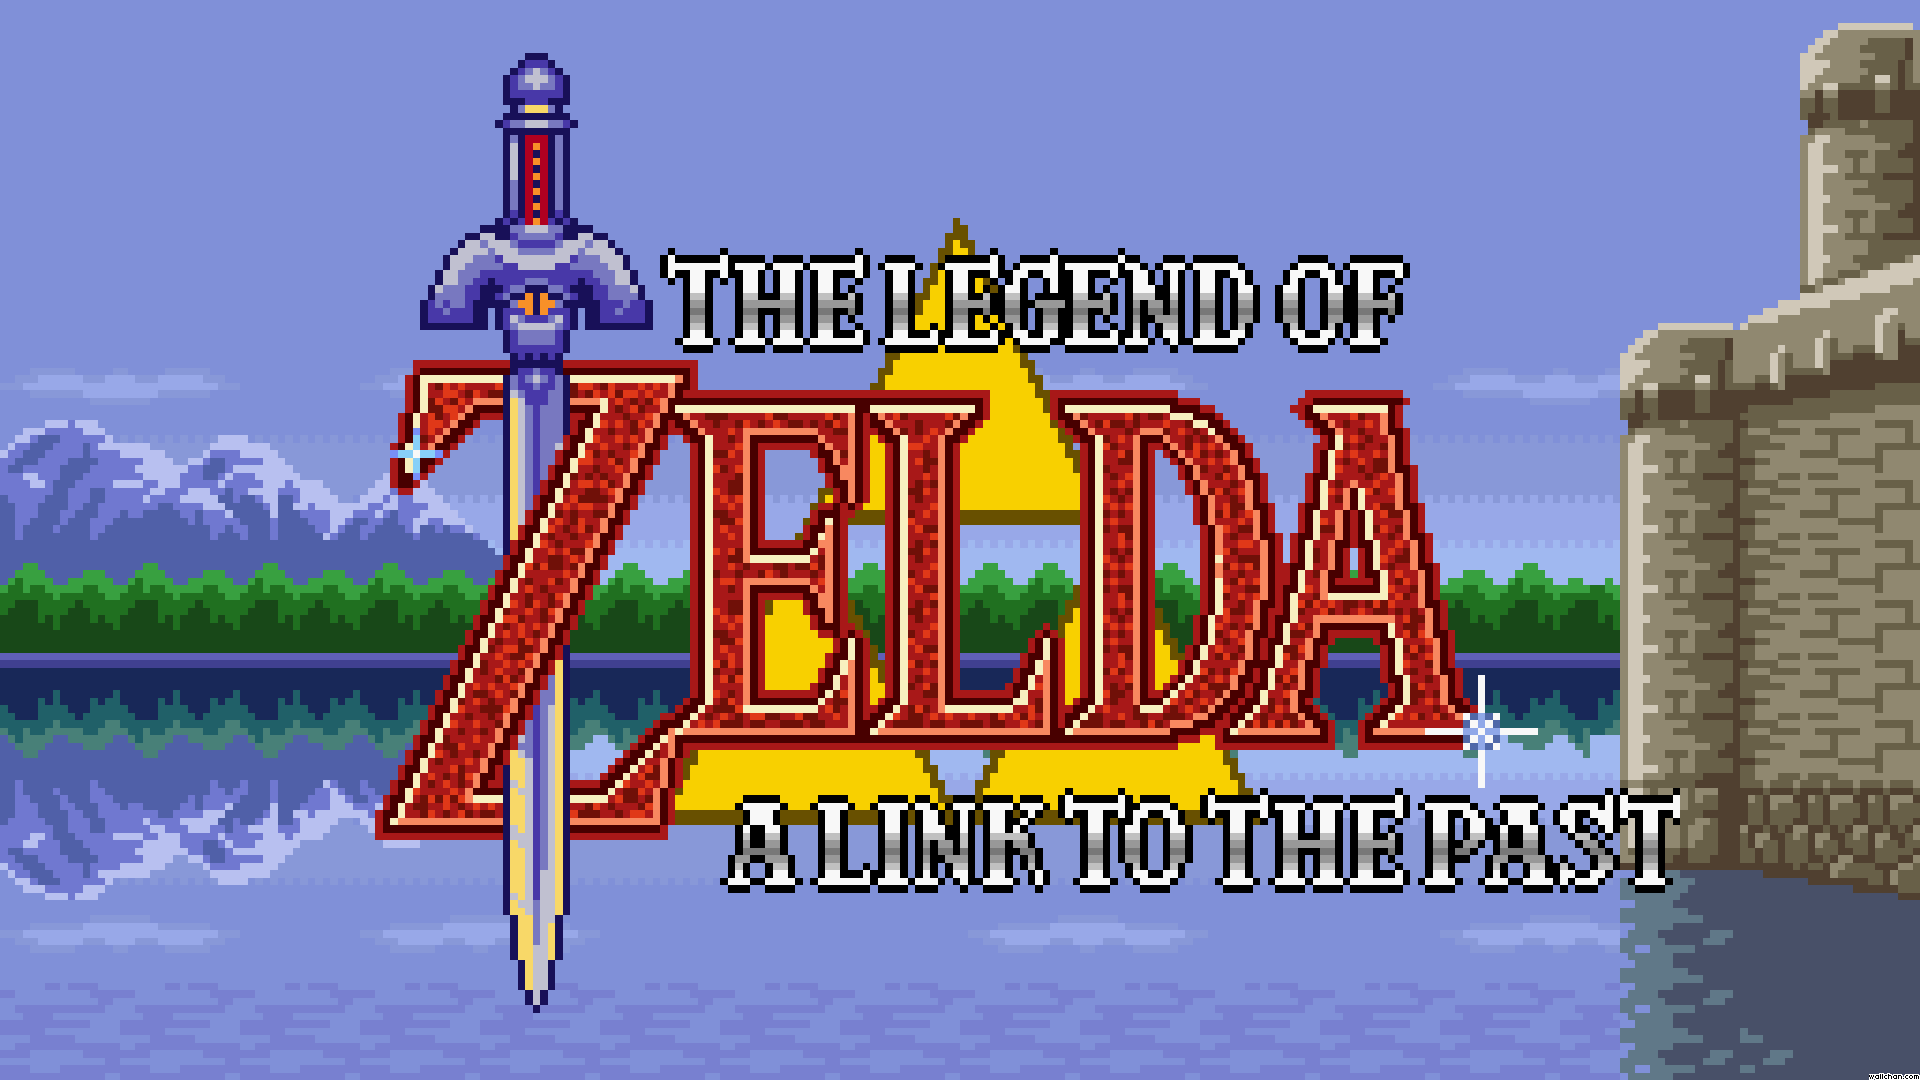 New is sequel to 'A Link to the